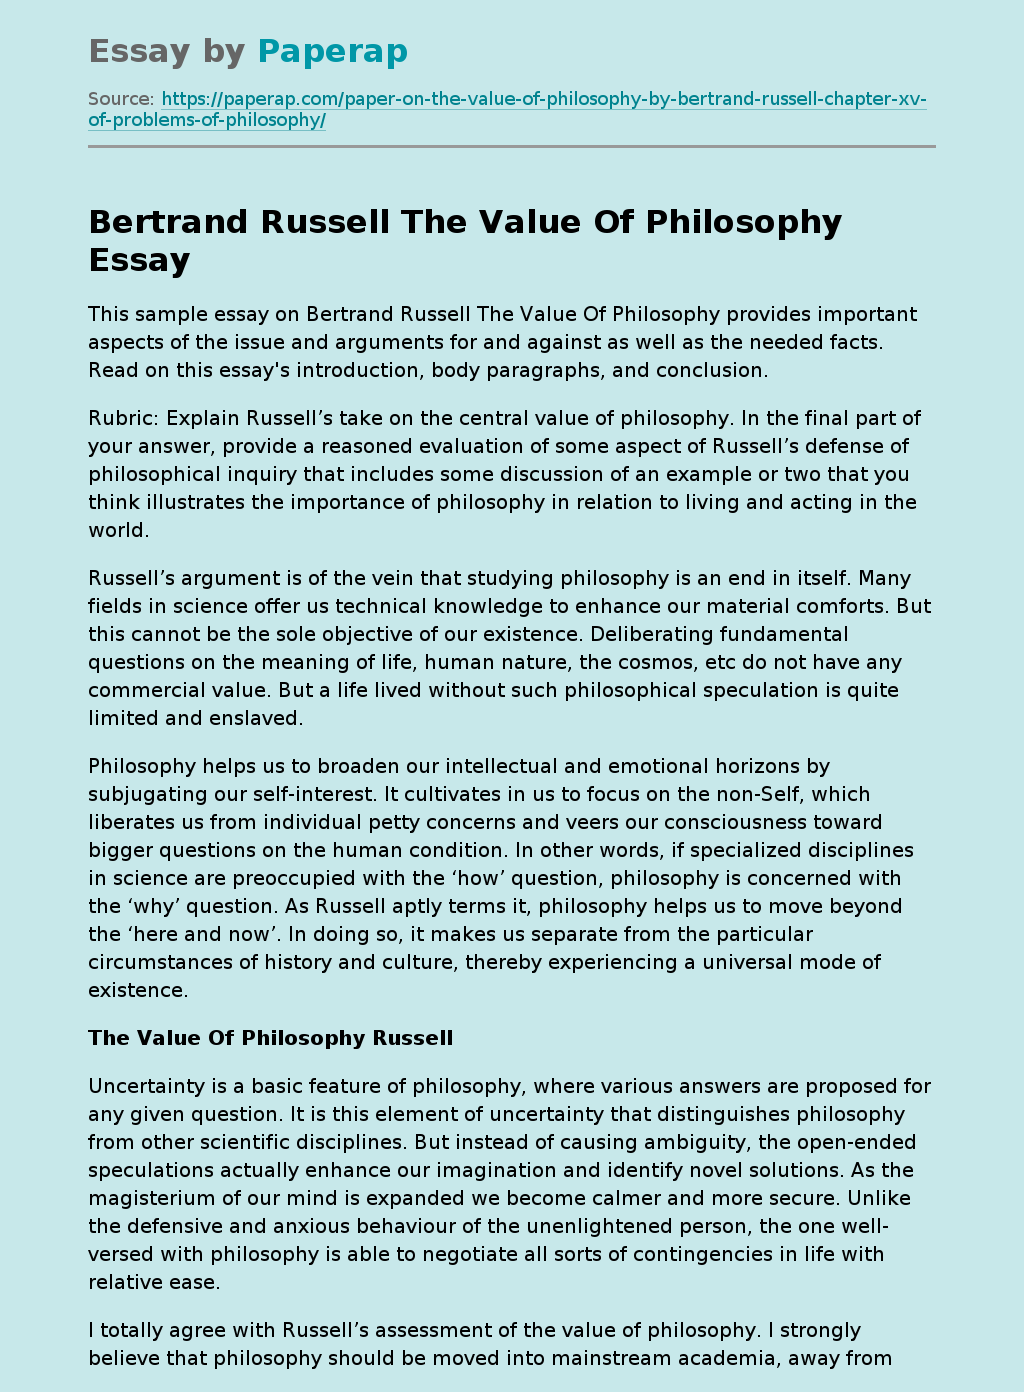 Bertrand Russell The Value Of Philosophy